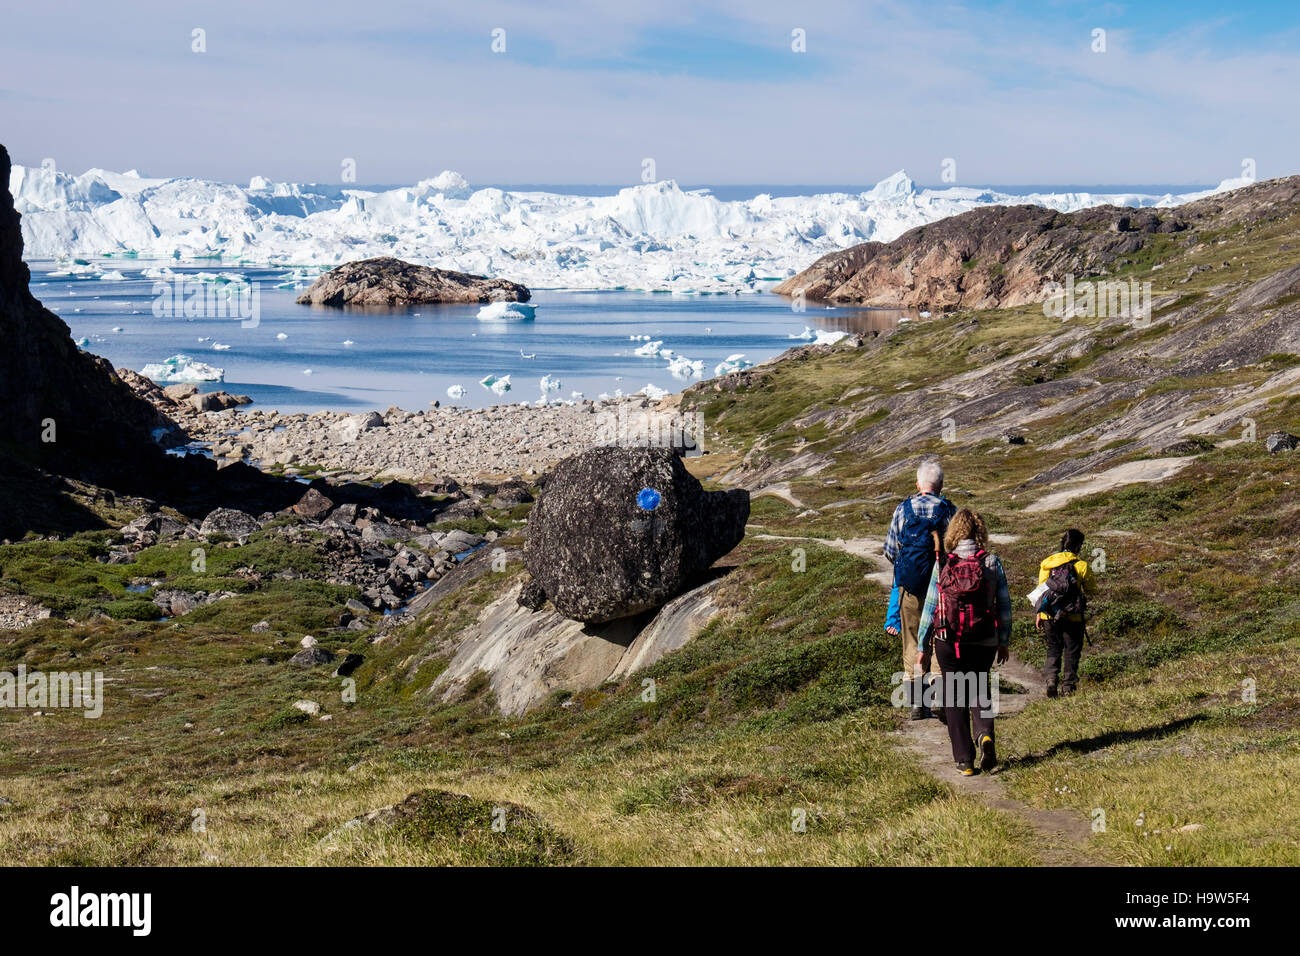 People hiking on blue trail hike to Holms Bakke Ilulissat Icefjord (Isfjord) with enormous icebergs in summer 2016. Ilulissat West Greenland Stock Photo